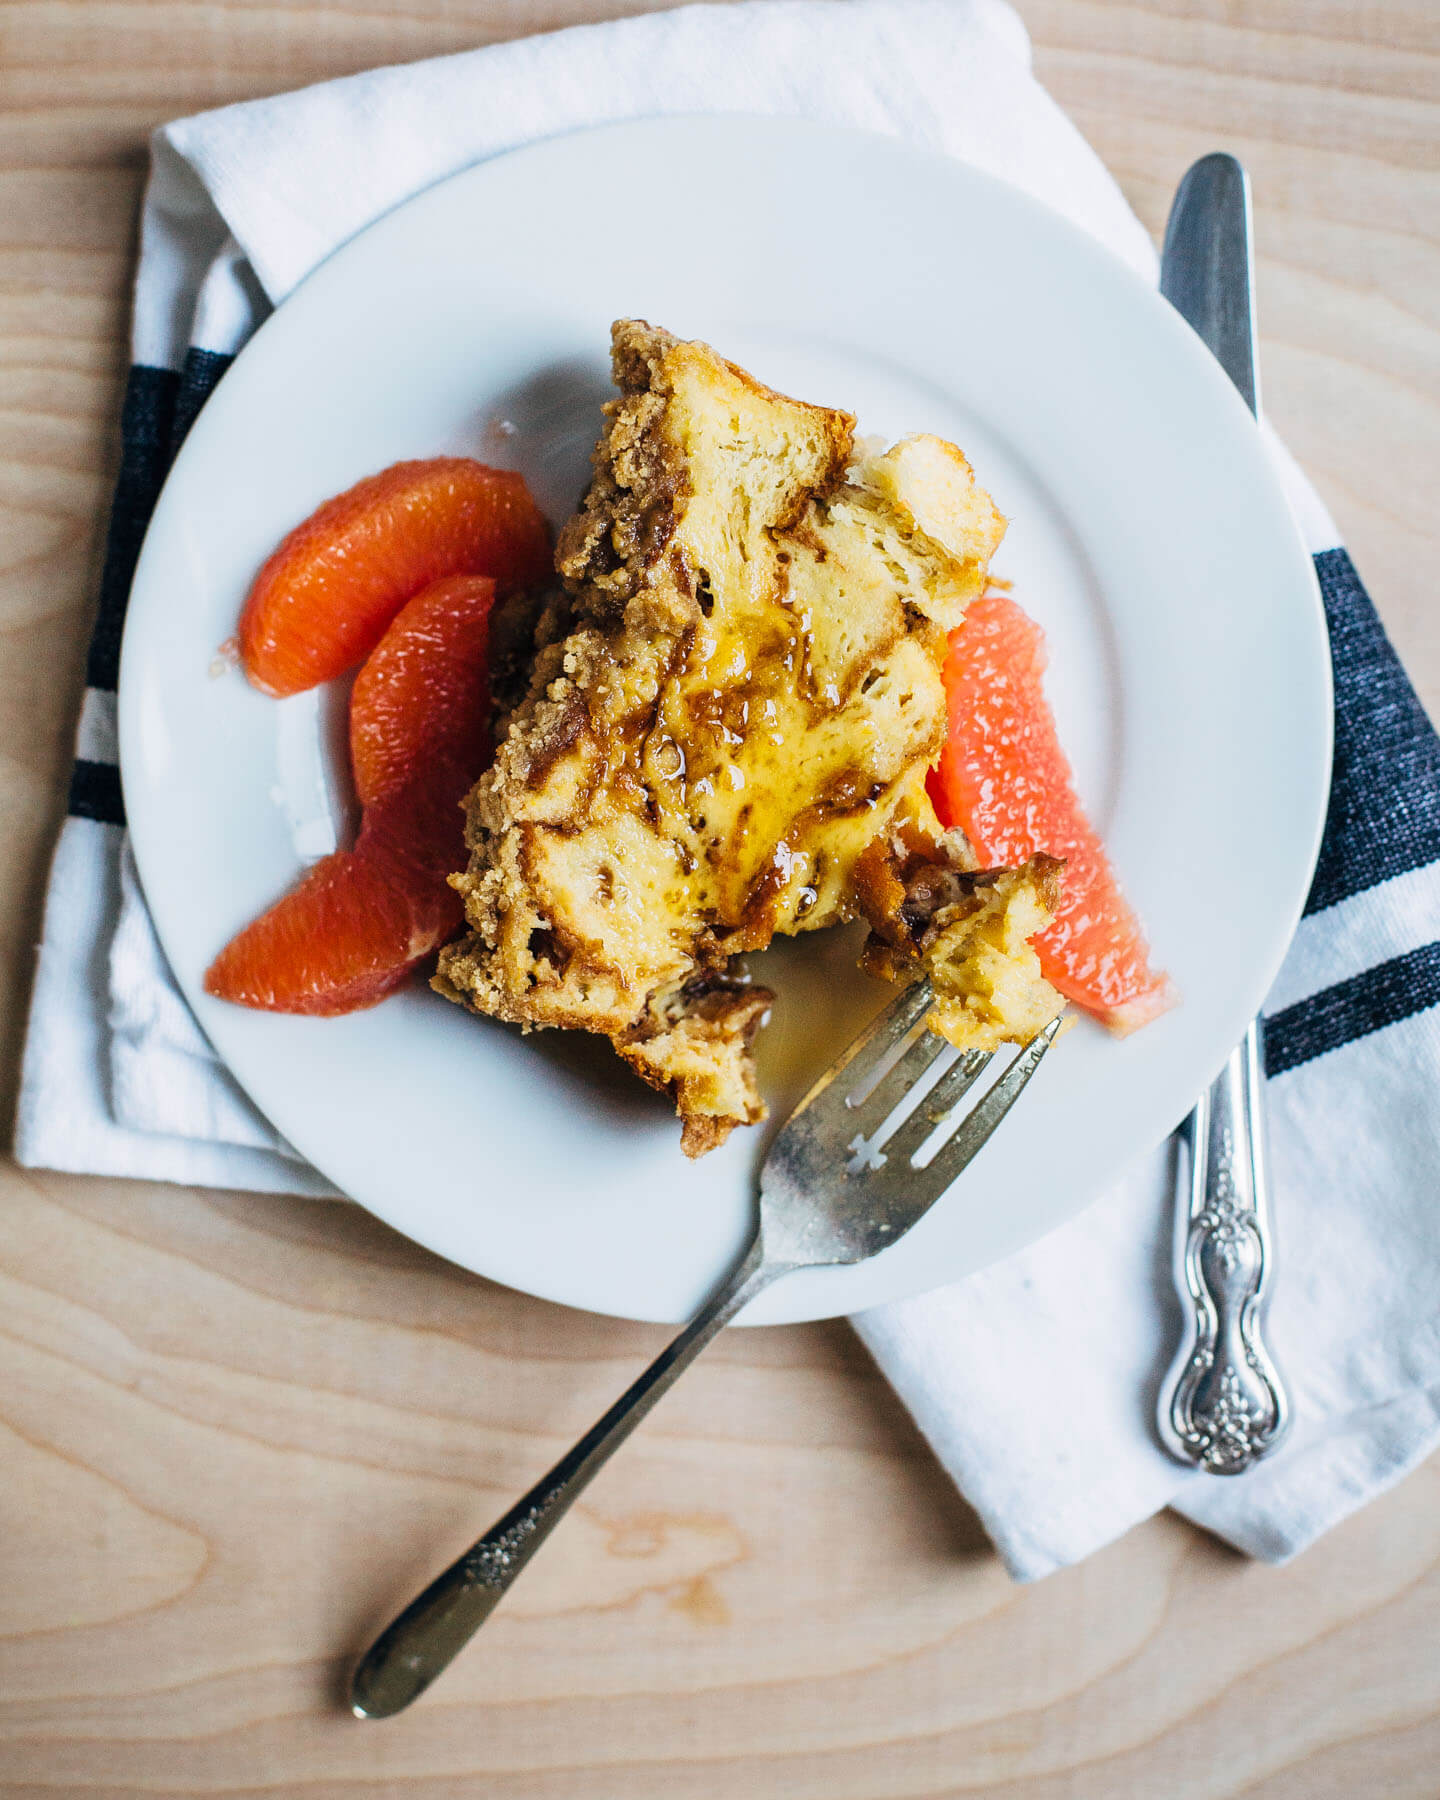 baked eggnog french toast + the gourmet kitchen // brooklyn supper